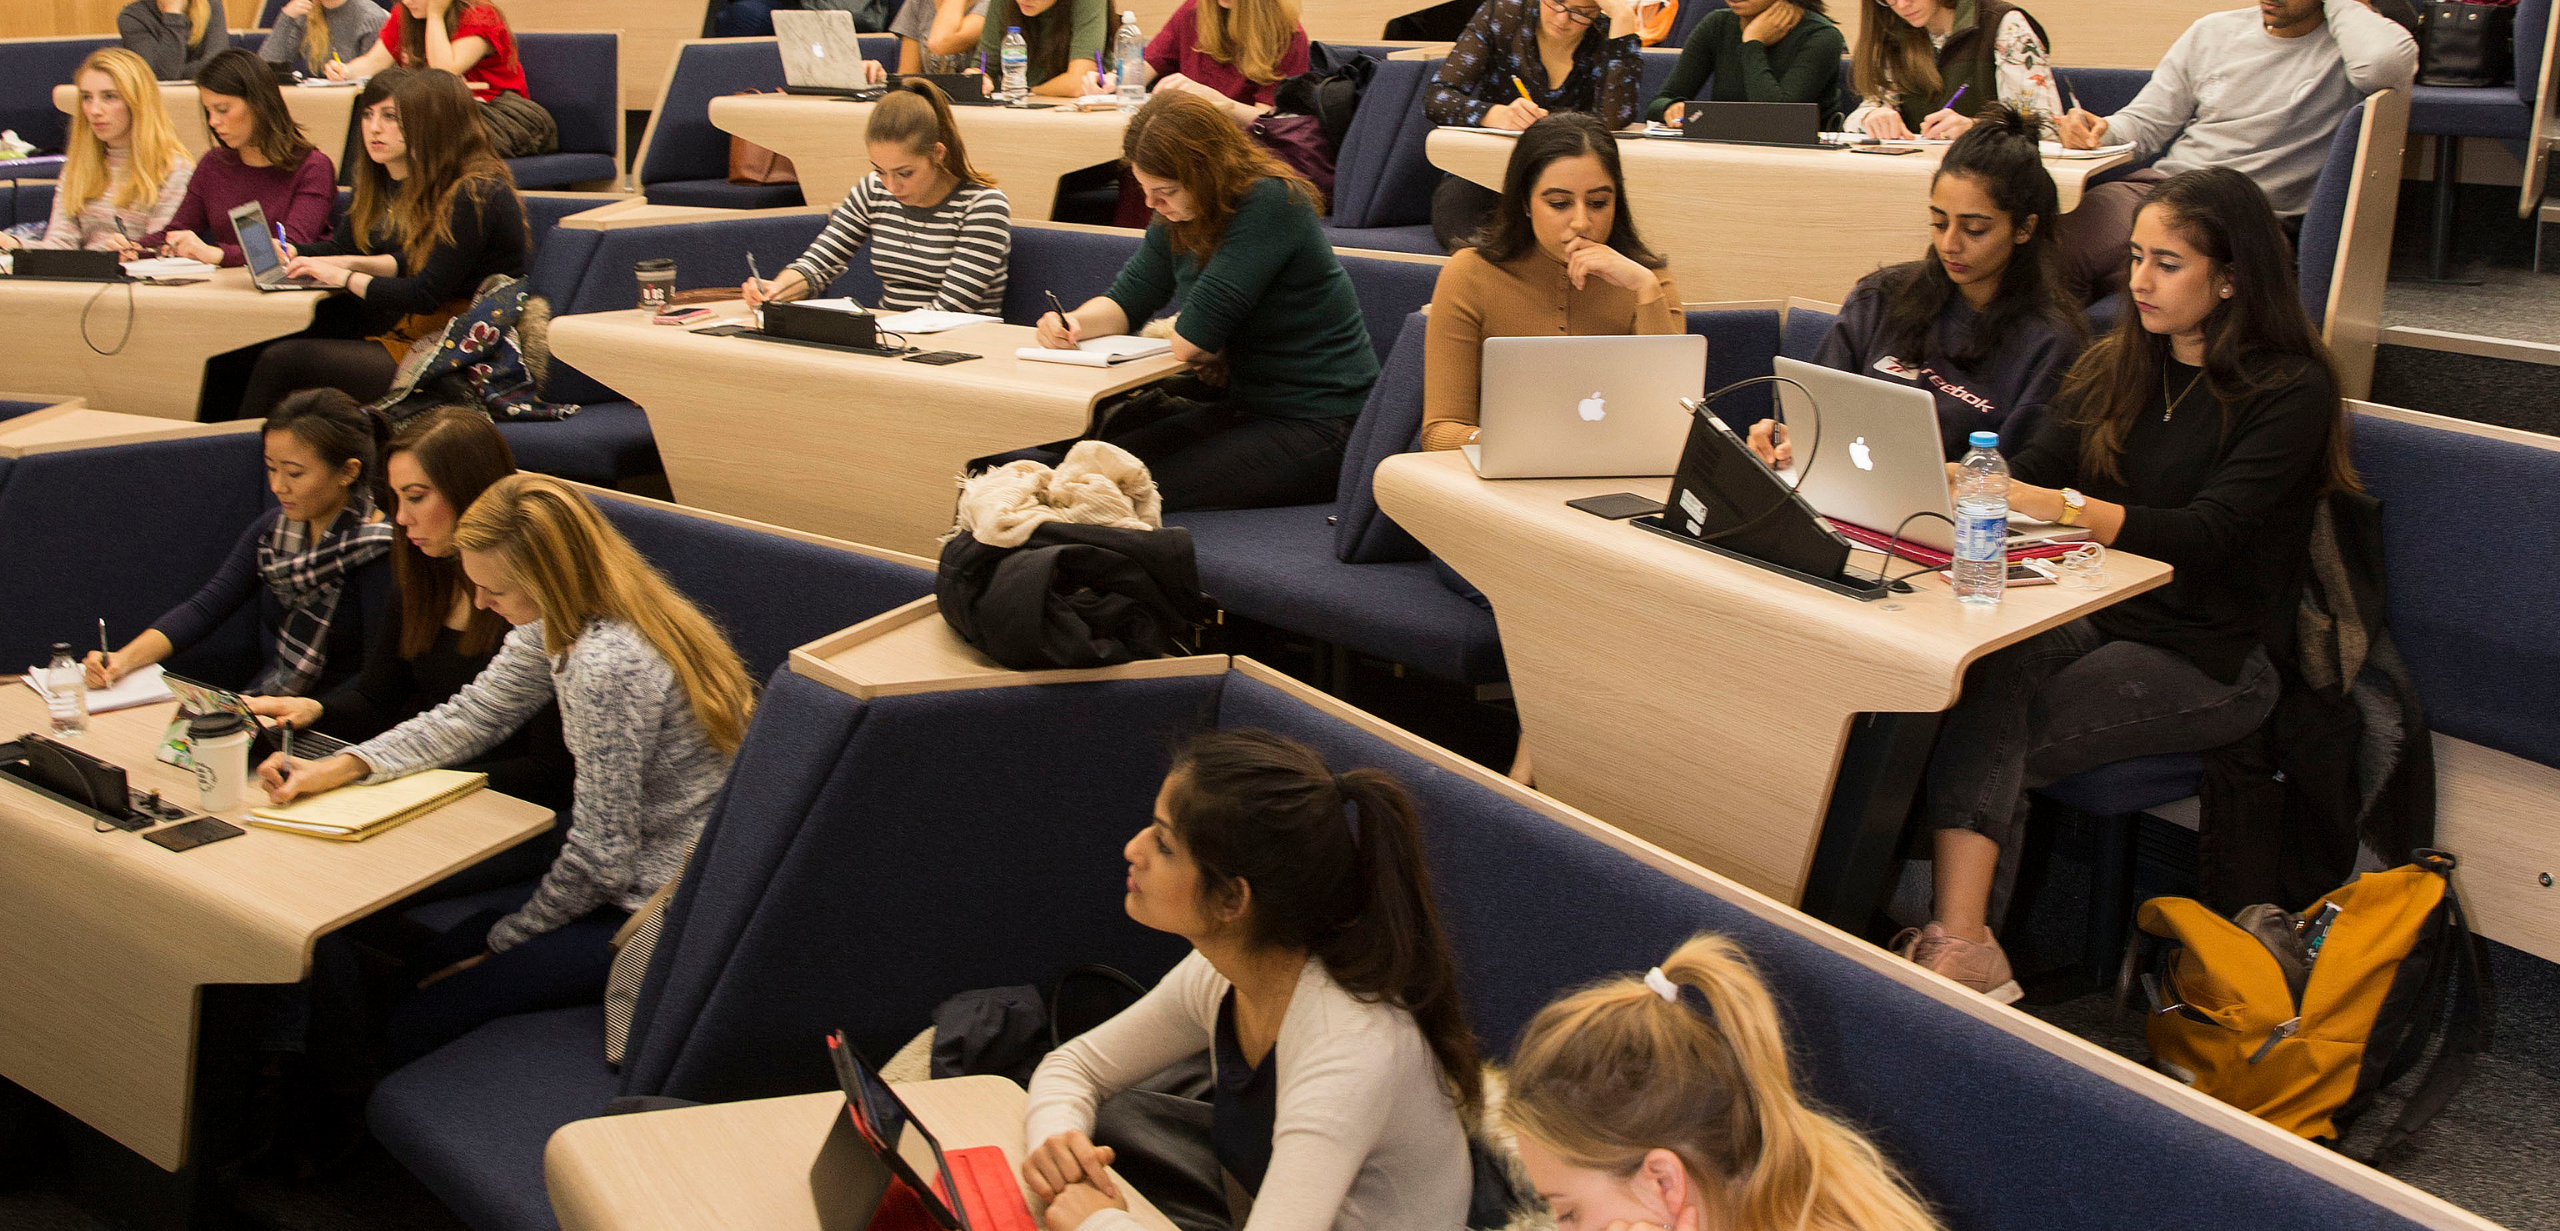 Students using Race Furniture Connect Seating at University of Leeds